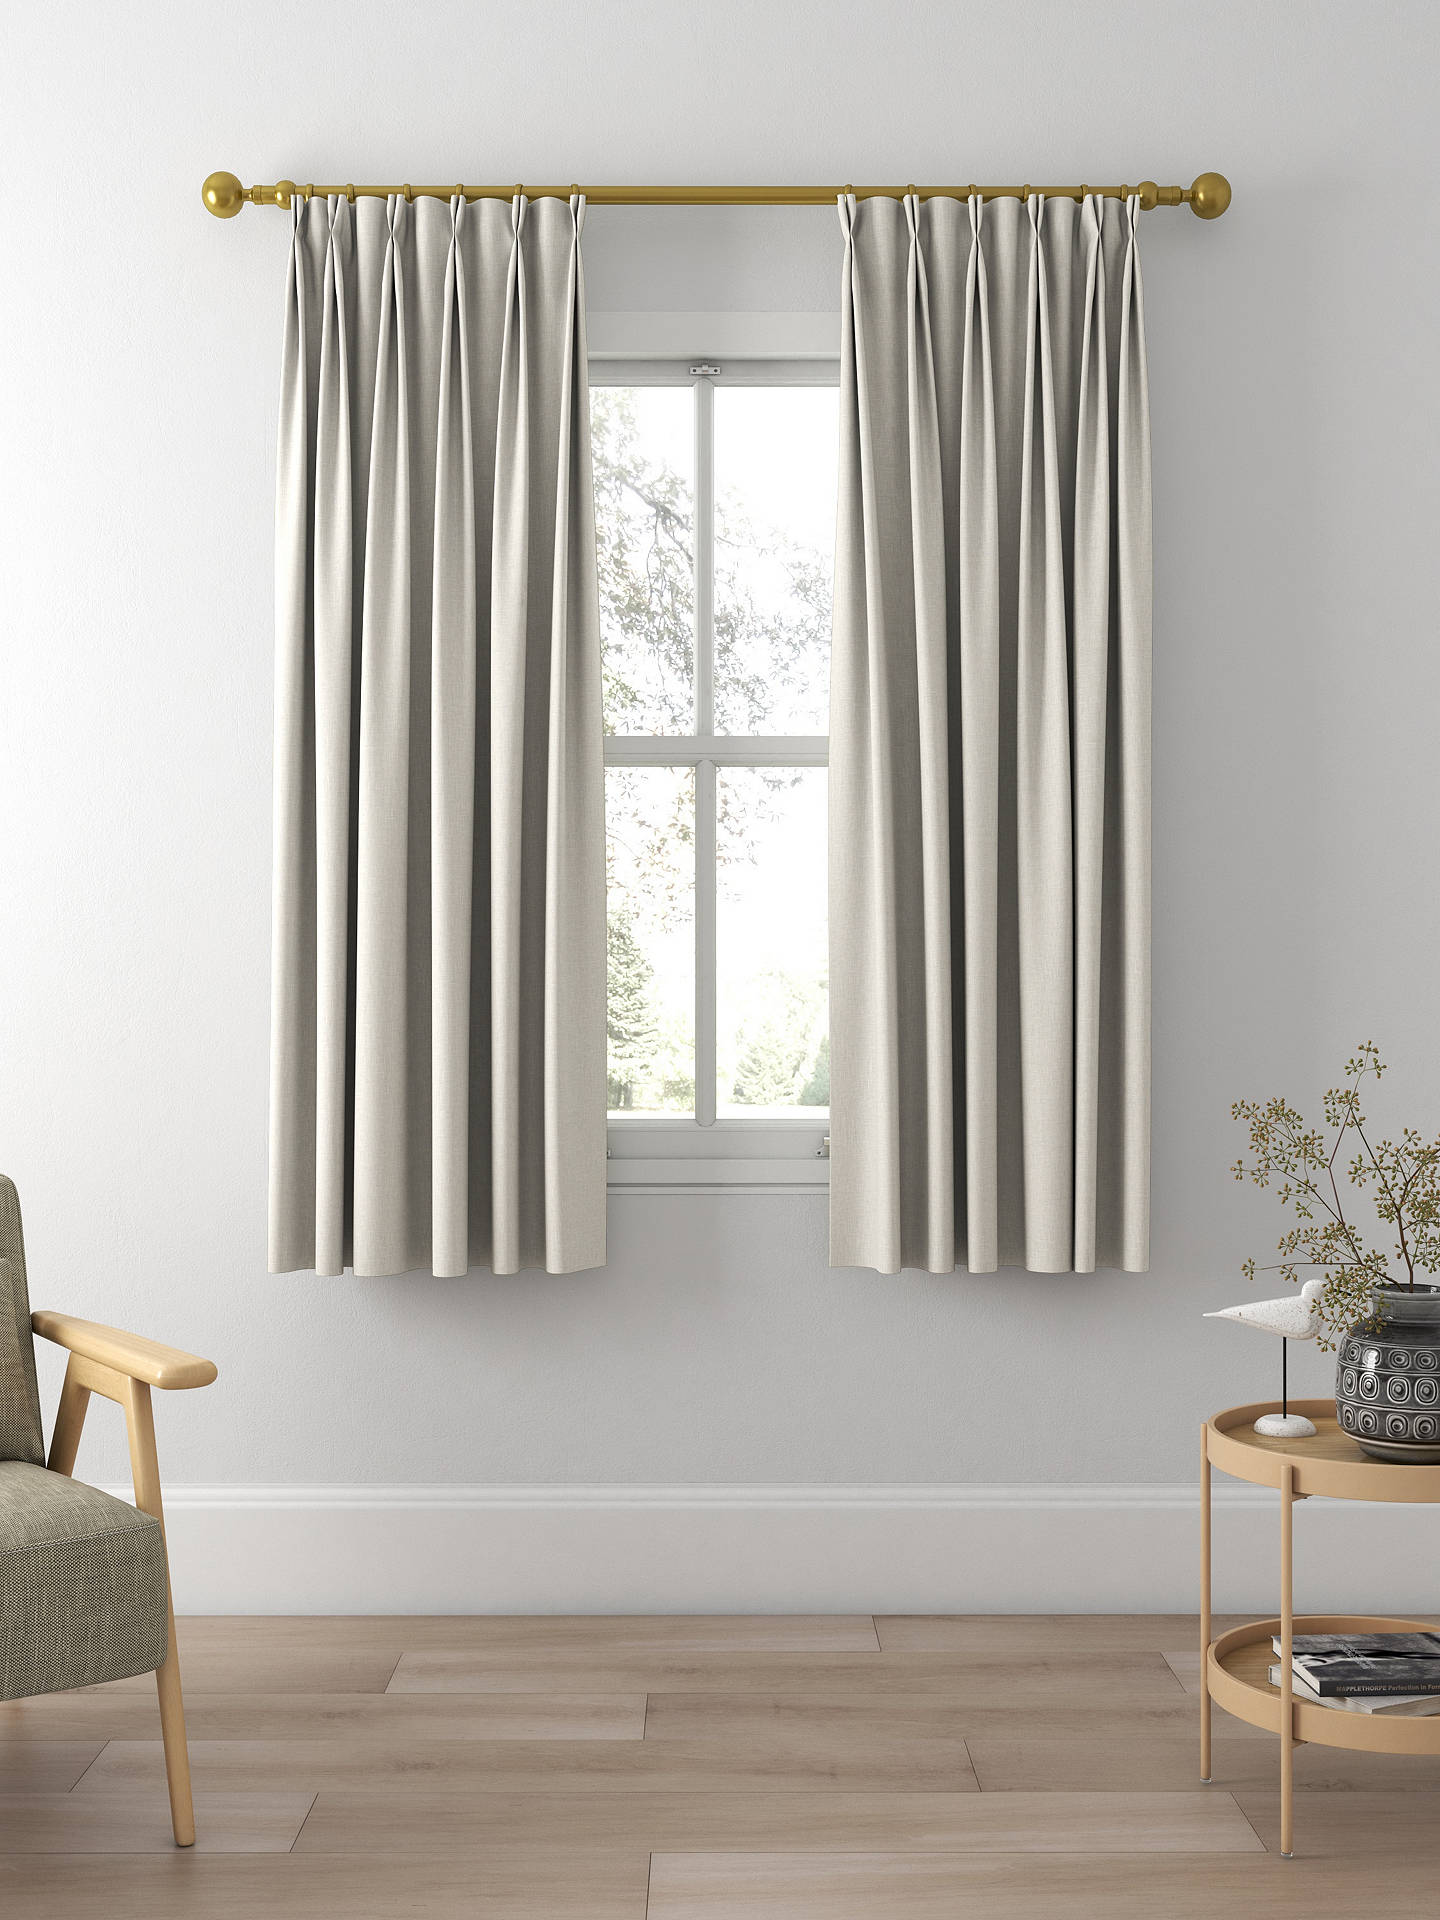 Laura Ashley Easton Made to Measure Curtains, Silver